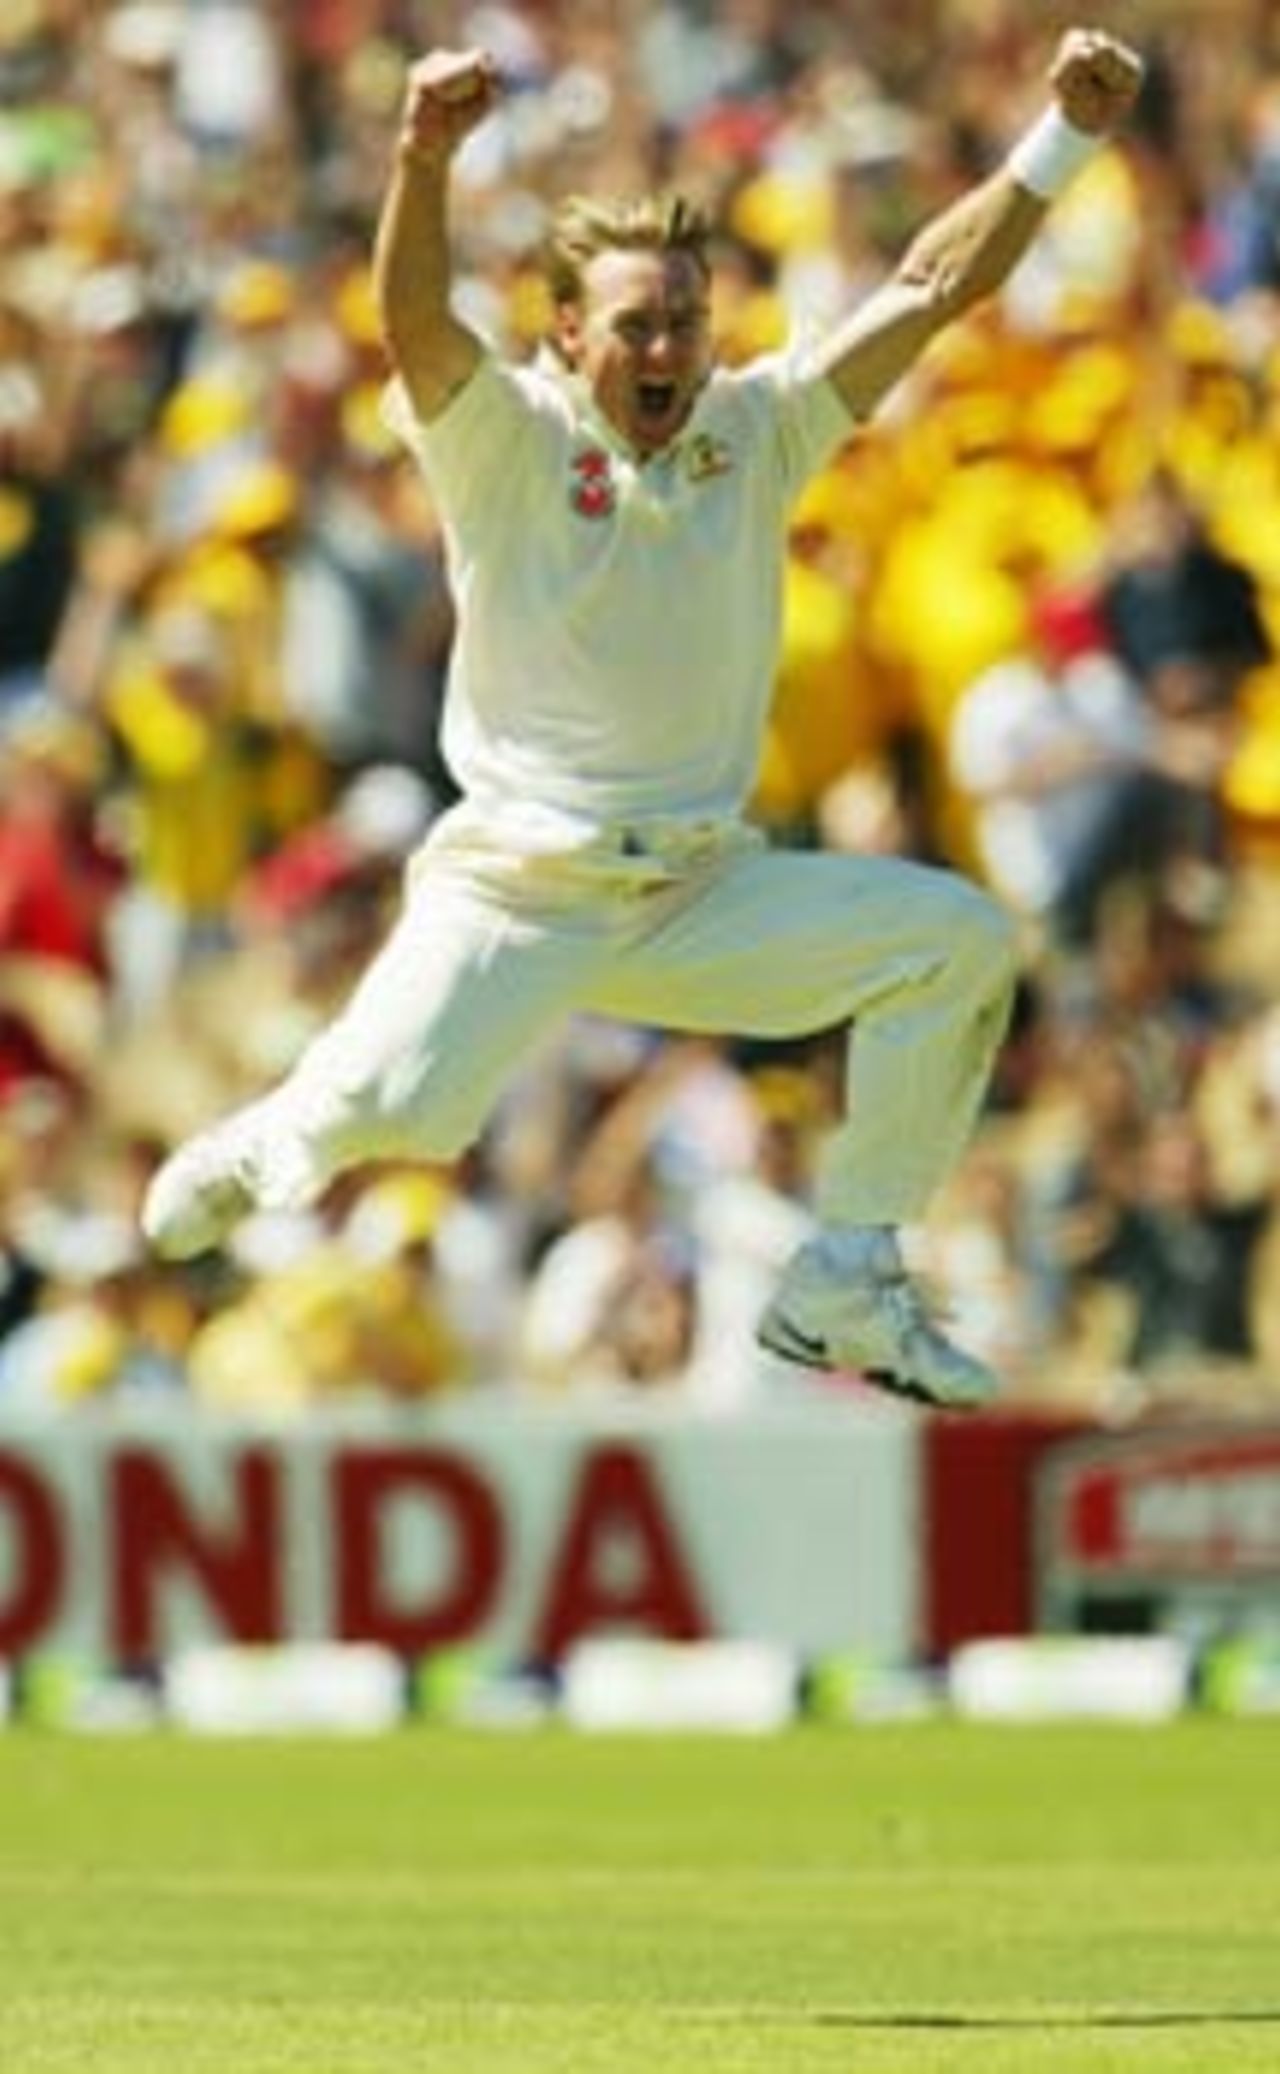 Bichel leaps for joy as he gets among the wickets, Australia v India, 2nd Test, Adelaide, 2nd day, December 13, 2003